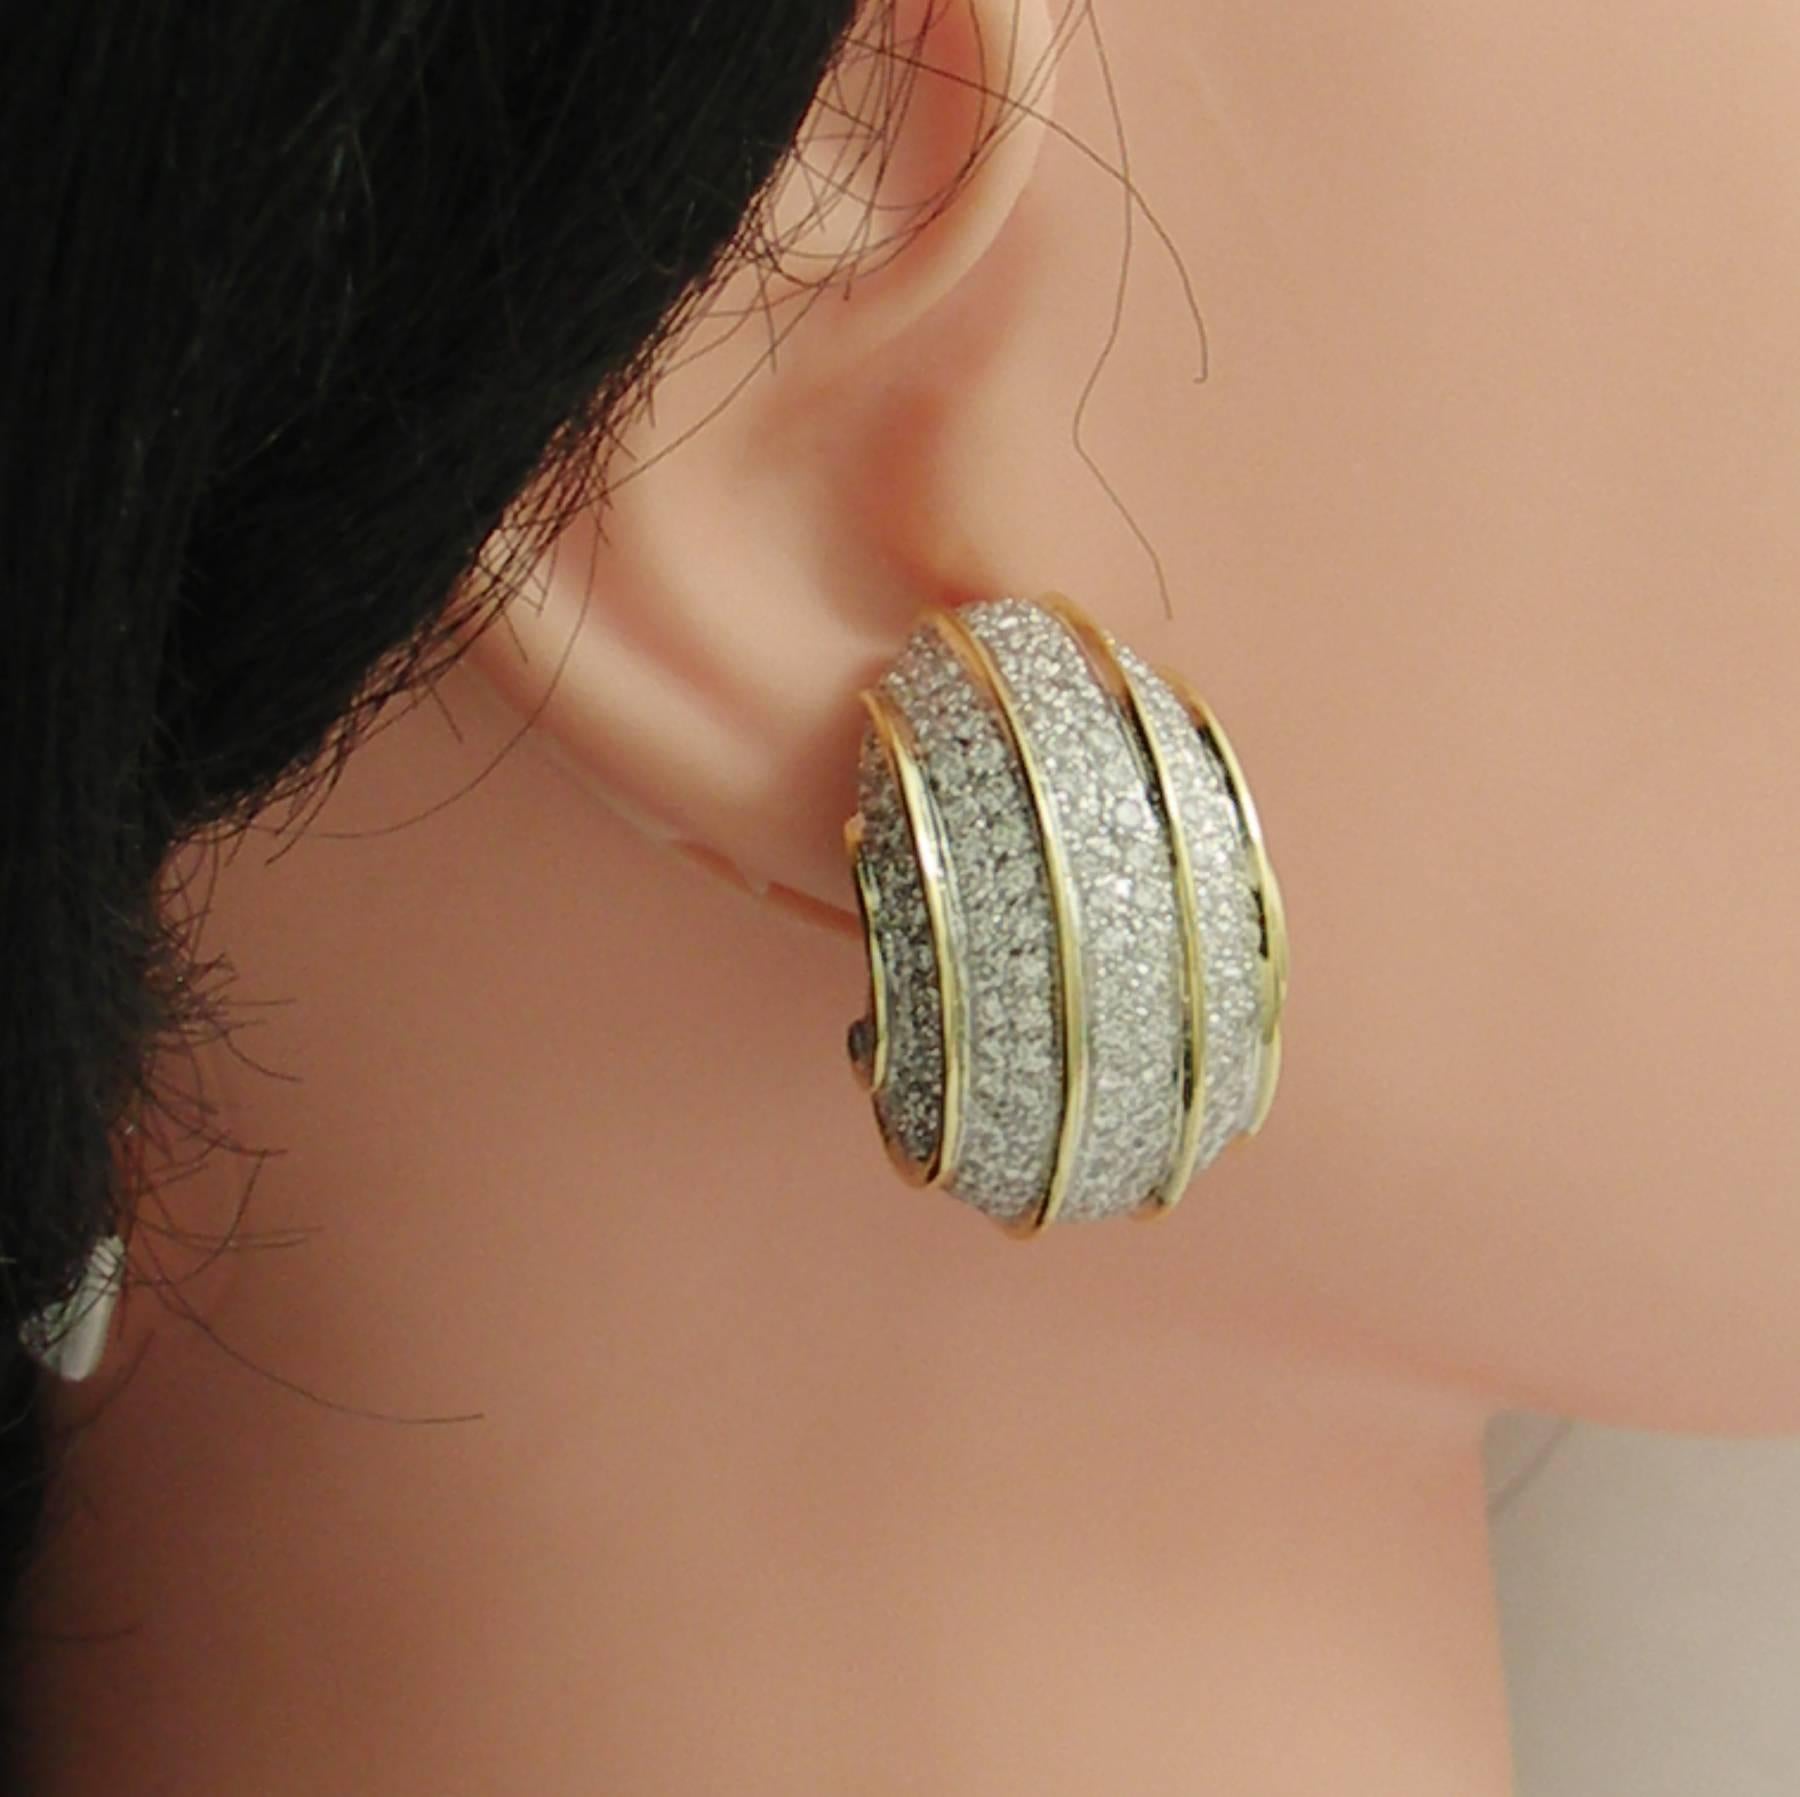 A pair of 18K yellow and white gold earrings measuring approximately 13/16 of an inch wide, and 1 1/4 inches long. These Deco inspired earrings feature a bombe design in white with yellow pin stripe detail. They are pave set with 464 round brilliant